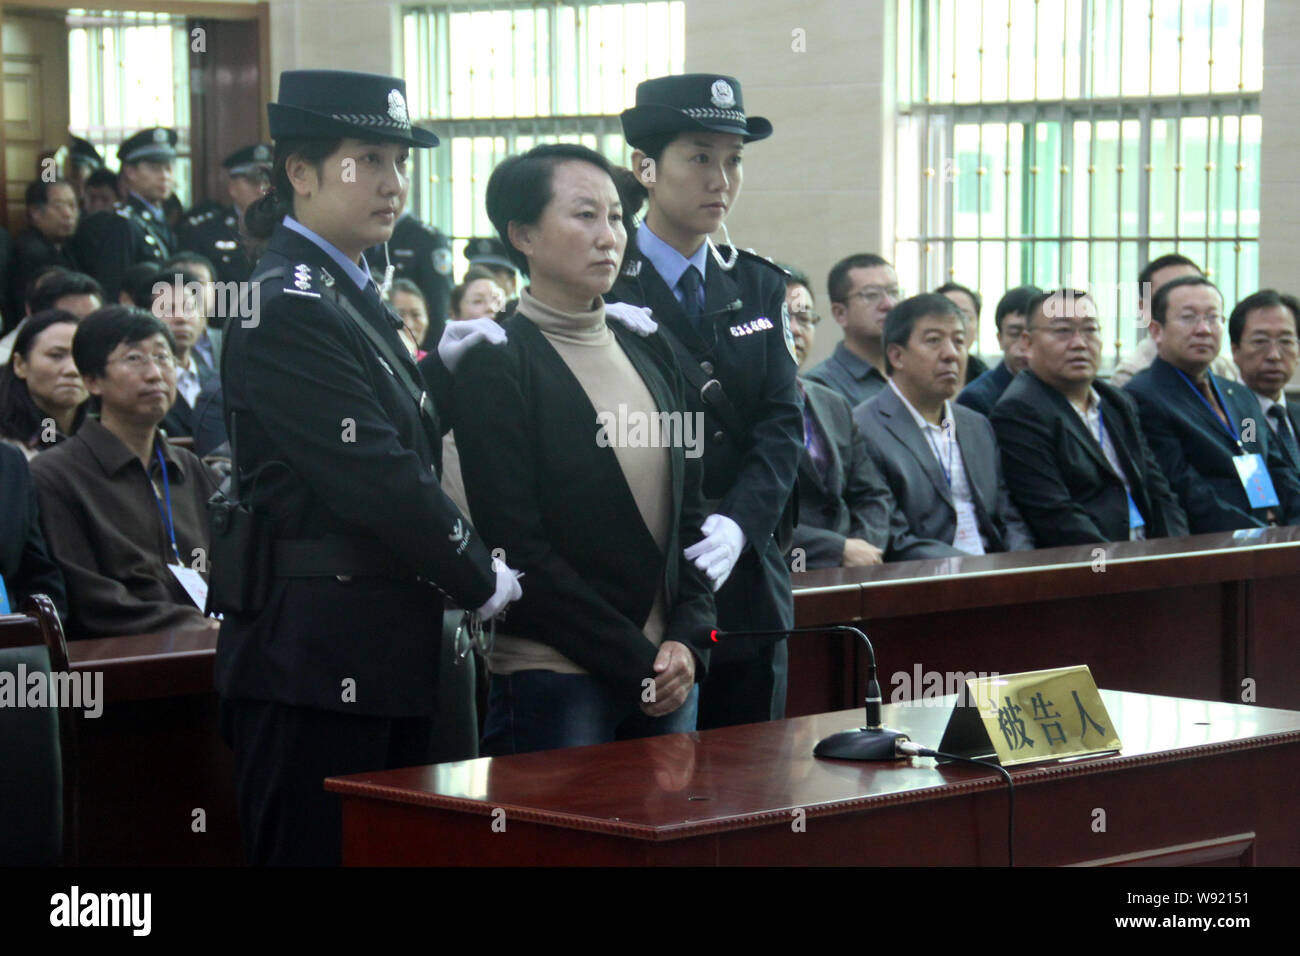 Gong Aiai, suspected of owning multiple properties under false identities, stands trial in Yulin city, northwest Chinas Shaanxi province, 24 September Stock Photo